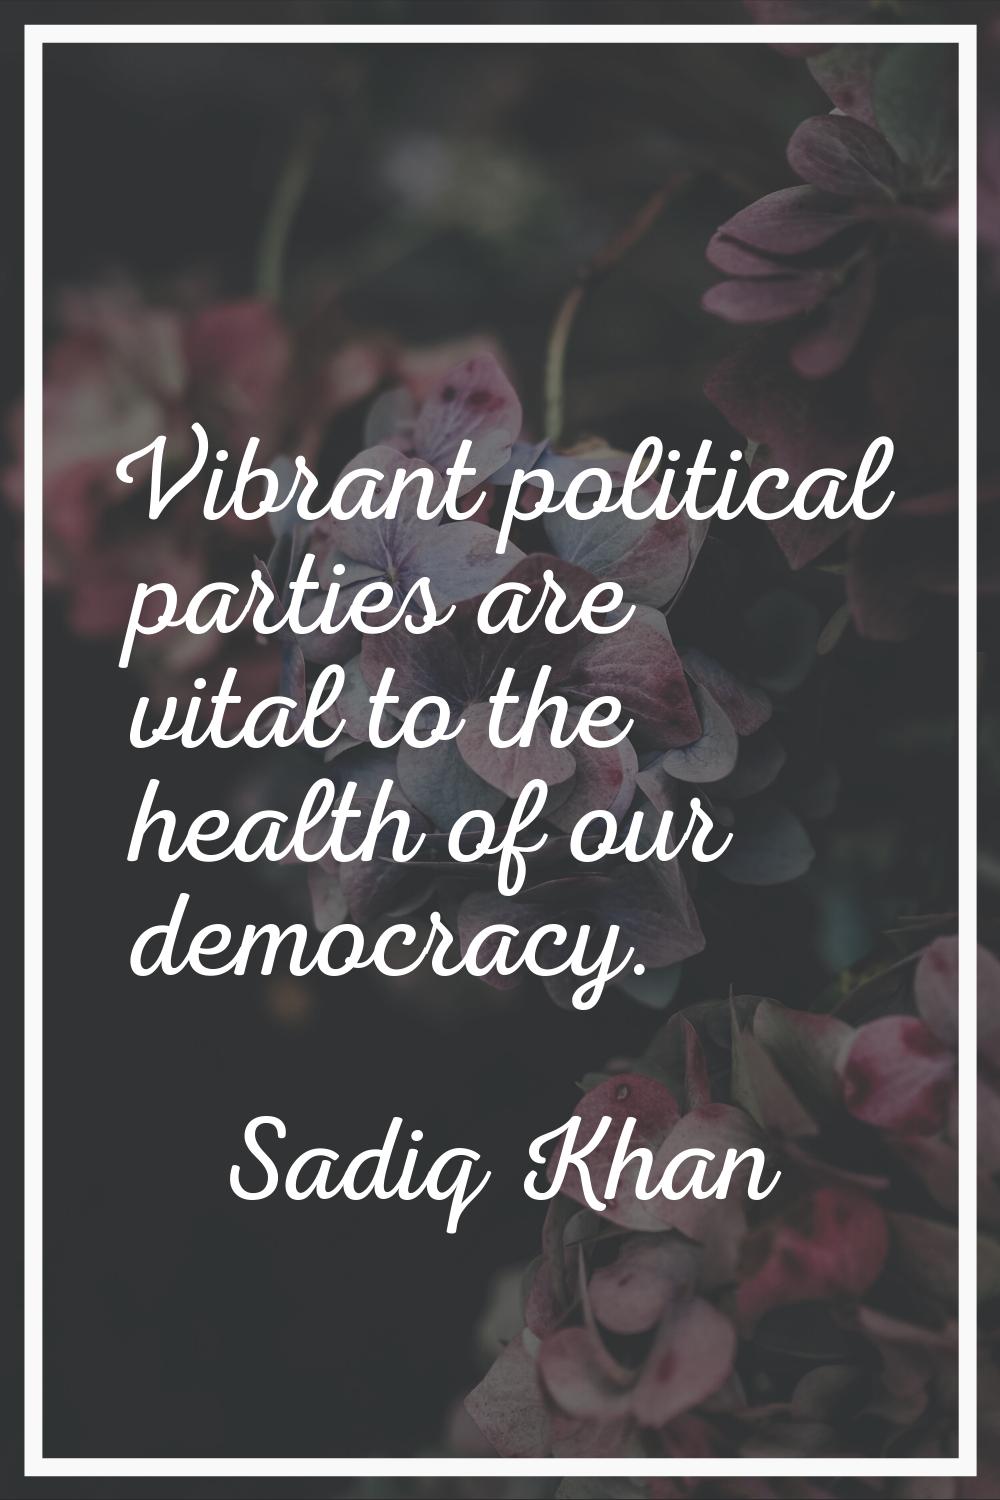 Vibrant political parties are vital to the health of our democracy.